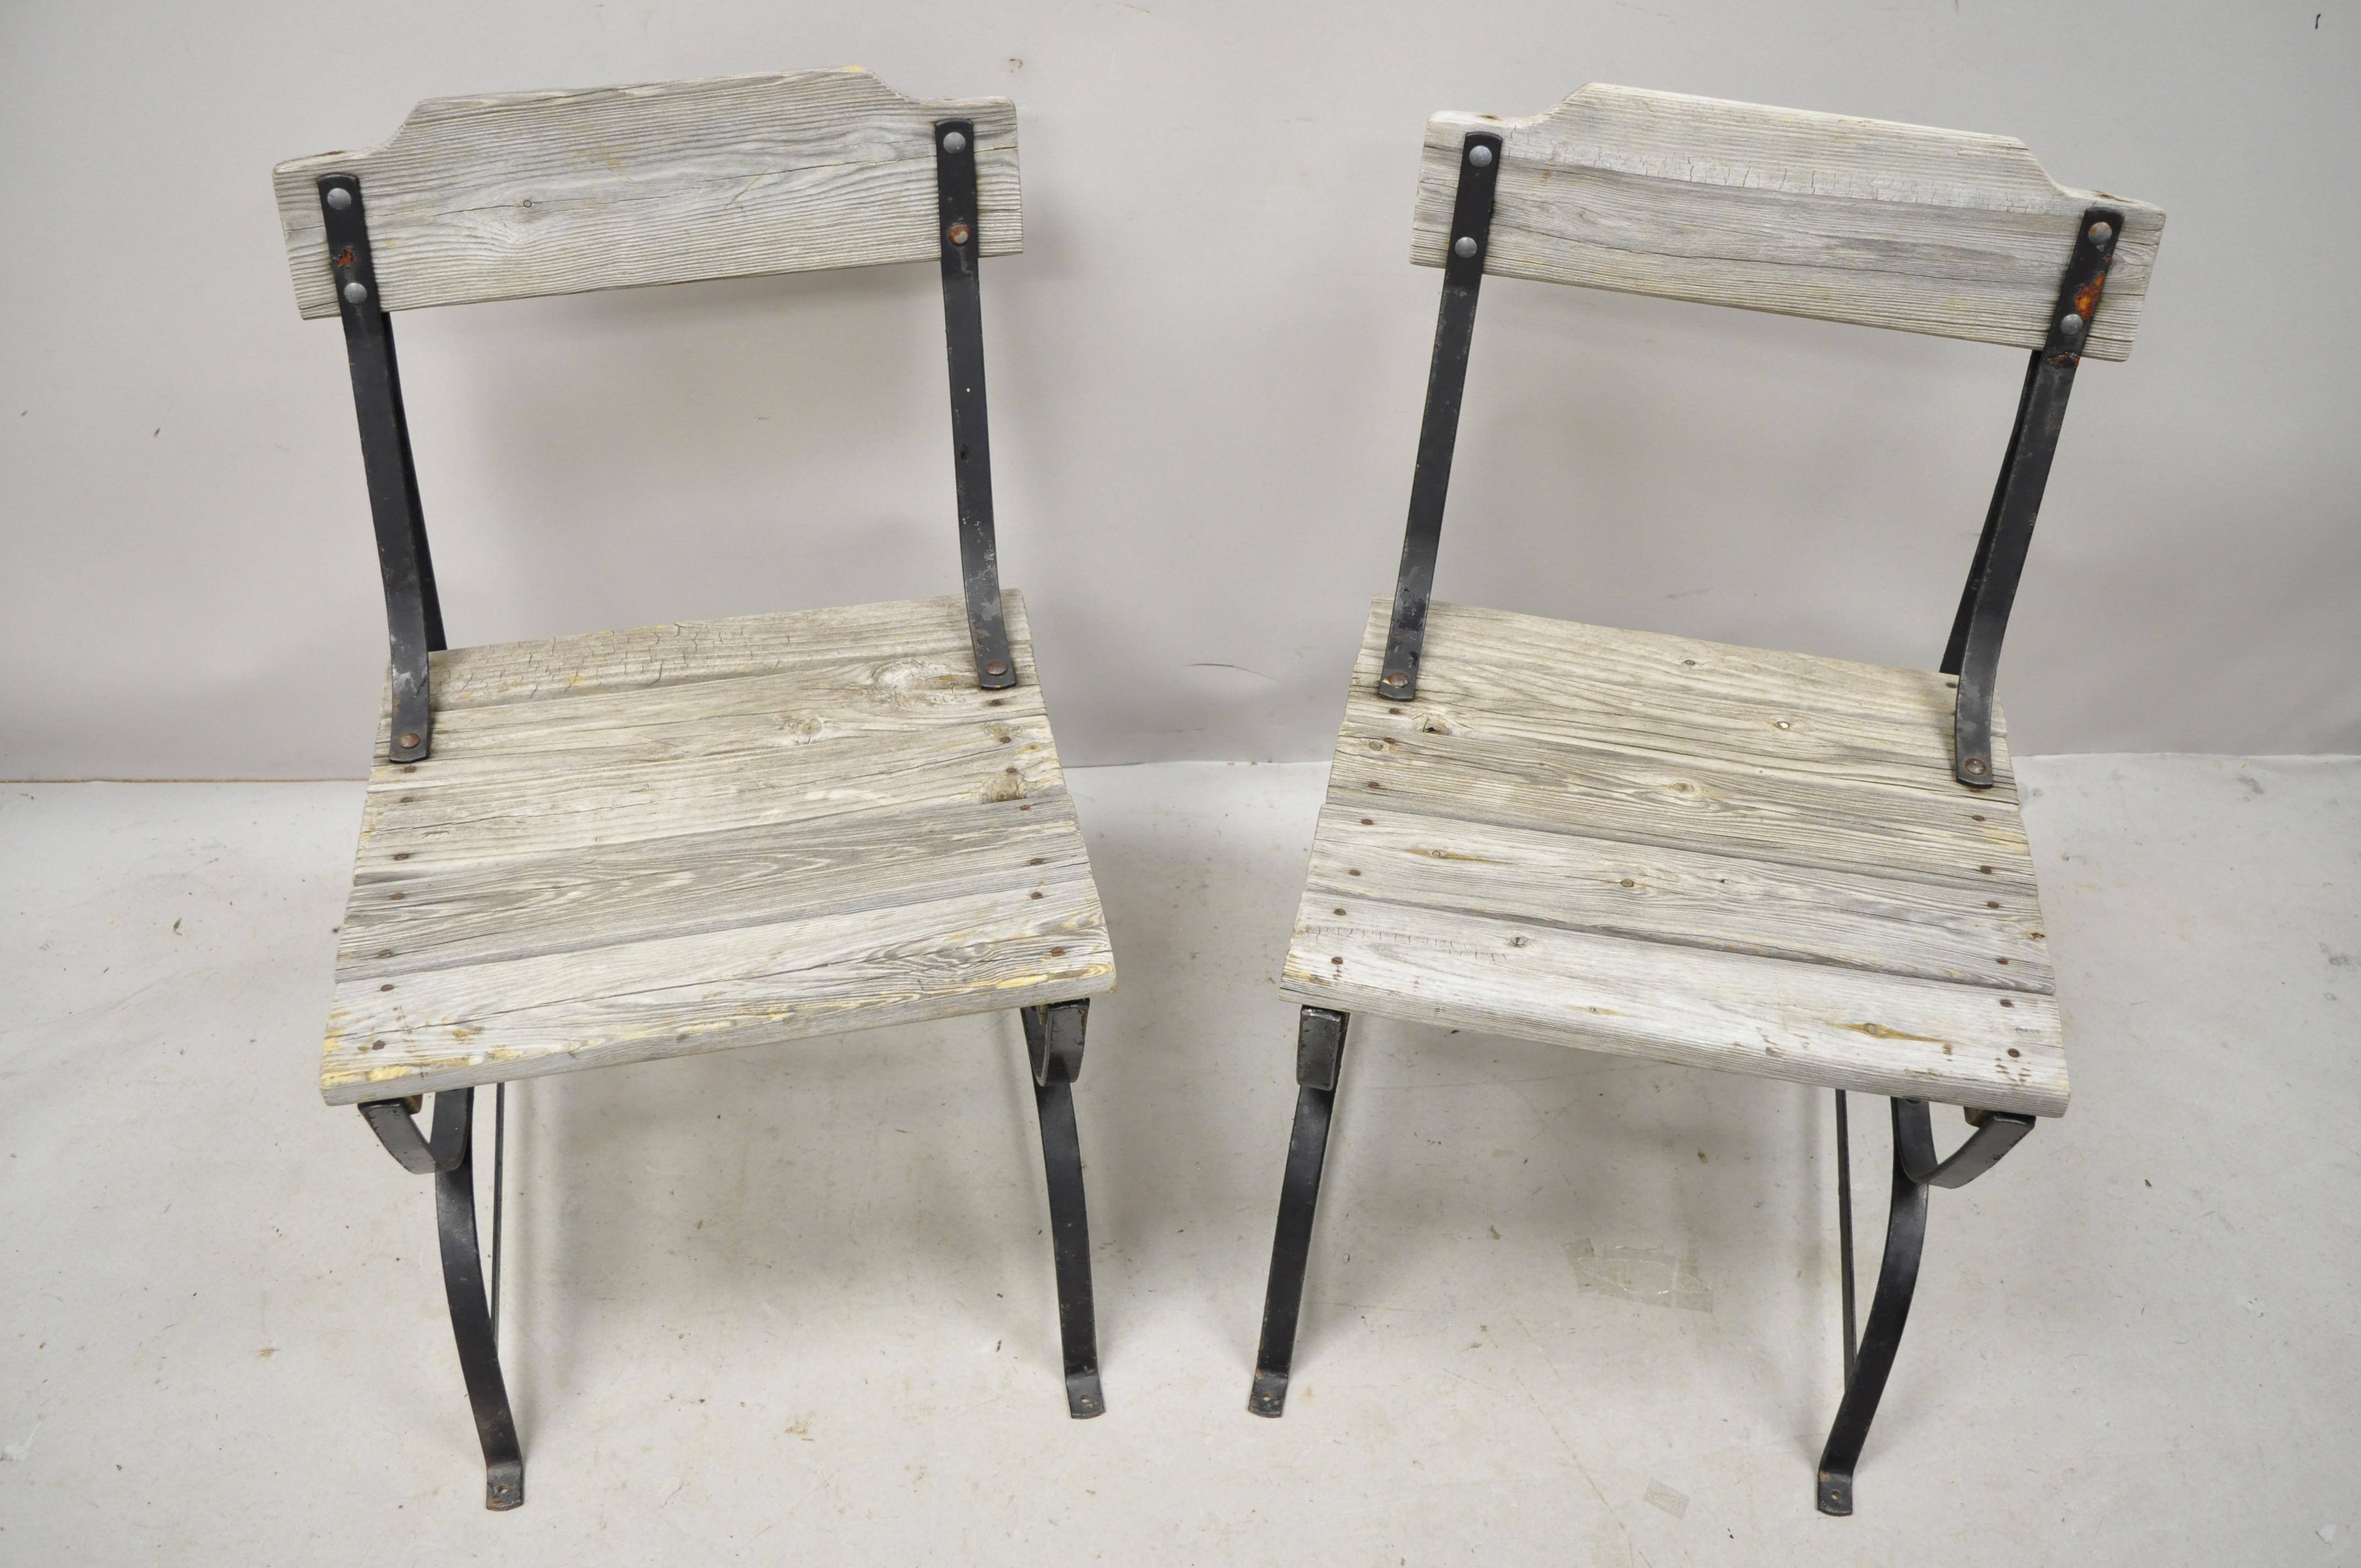 Antique French Industrial Wrought Iron Wooden Slat Seat Side Chairs, a Pair For Sale 6